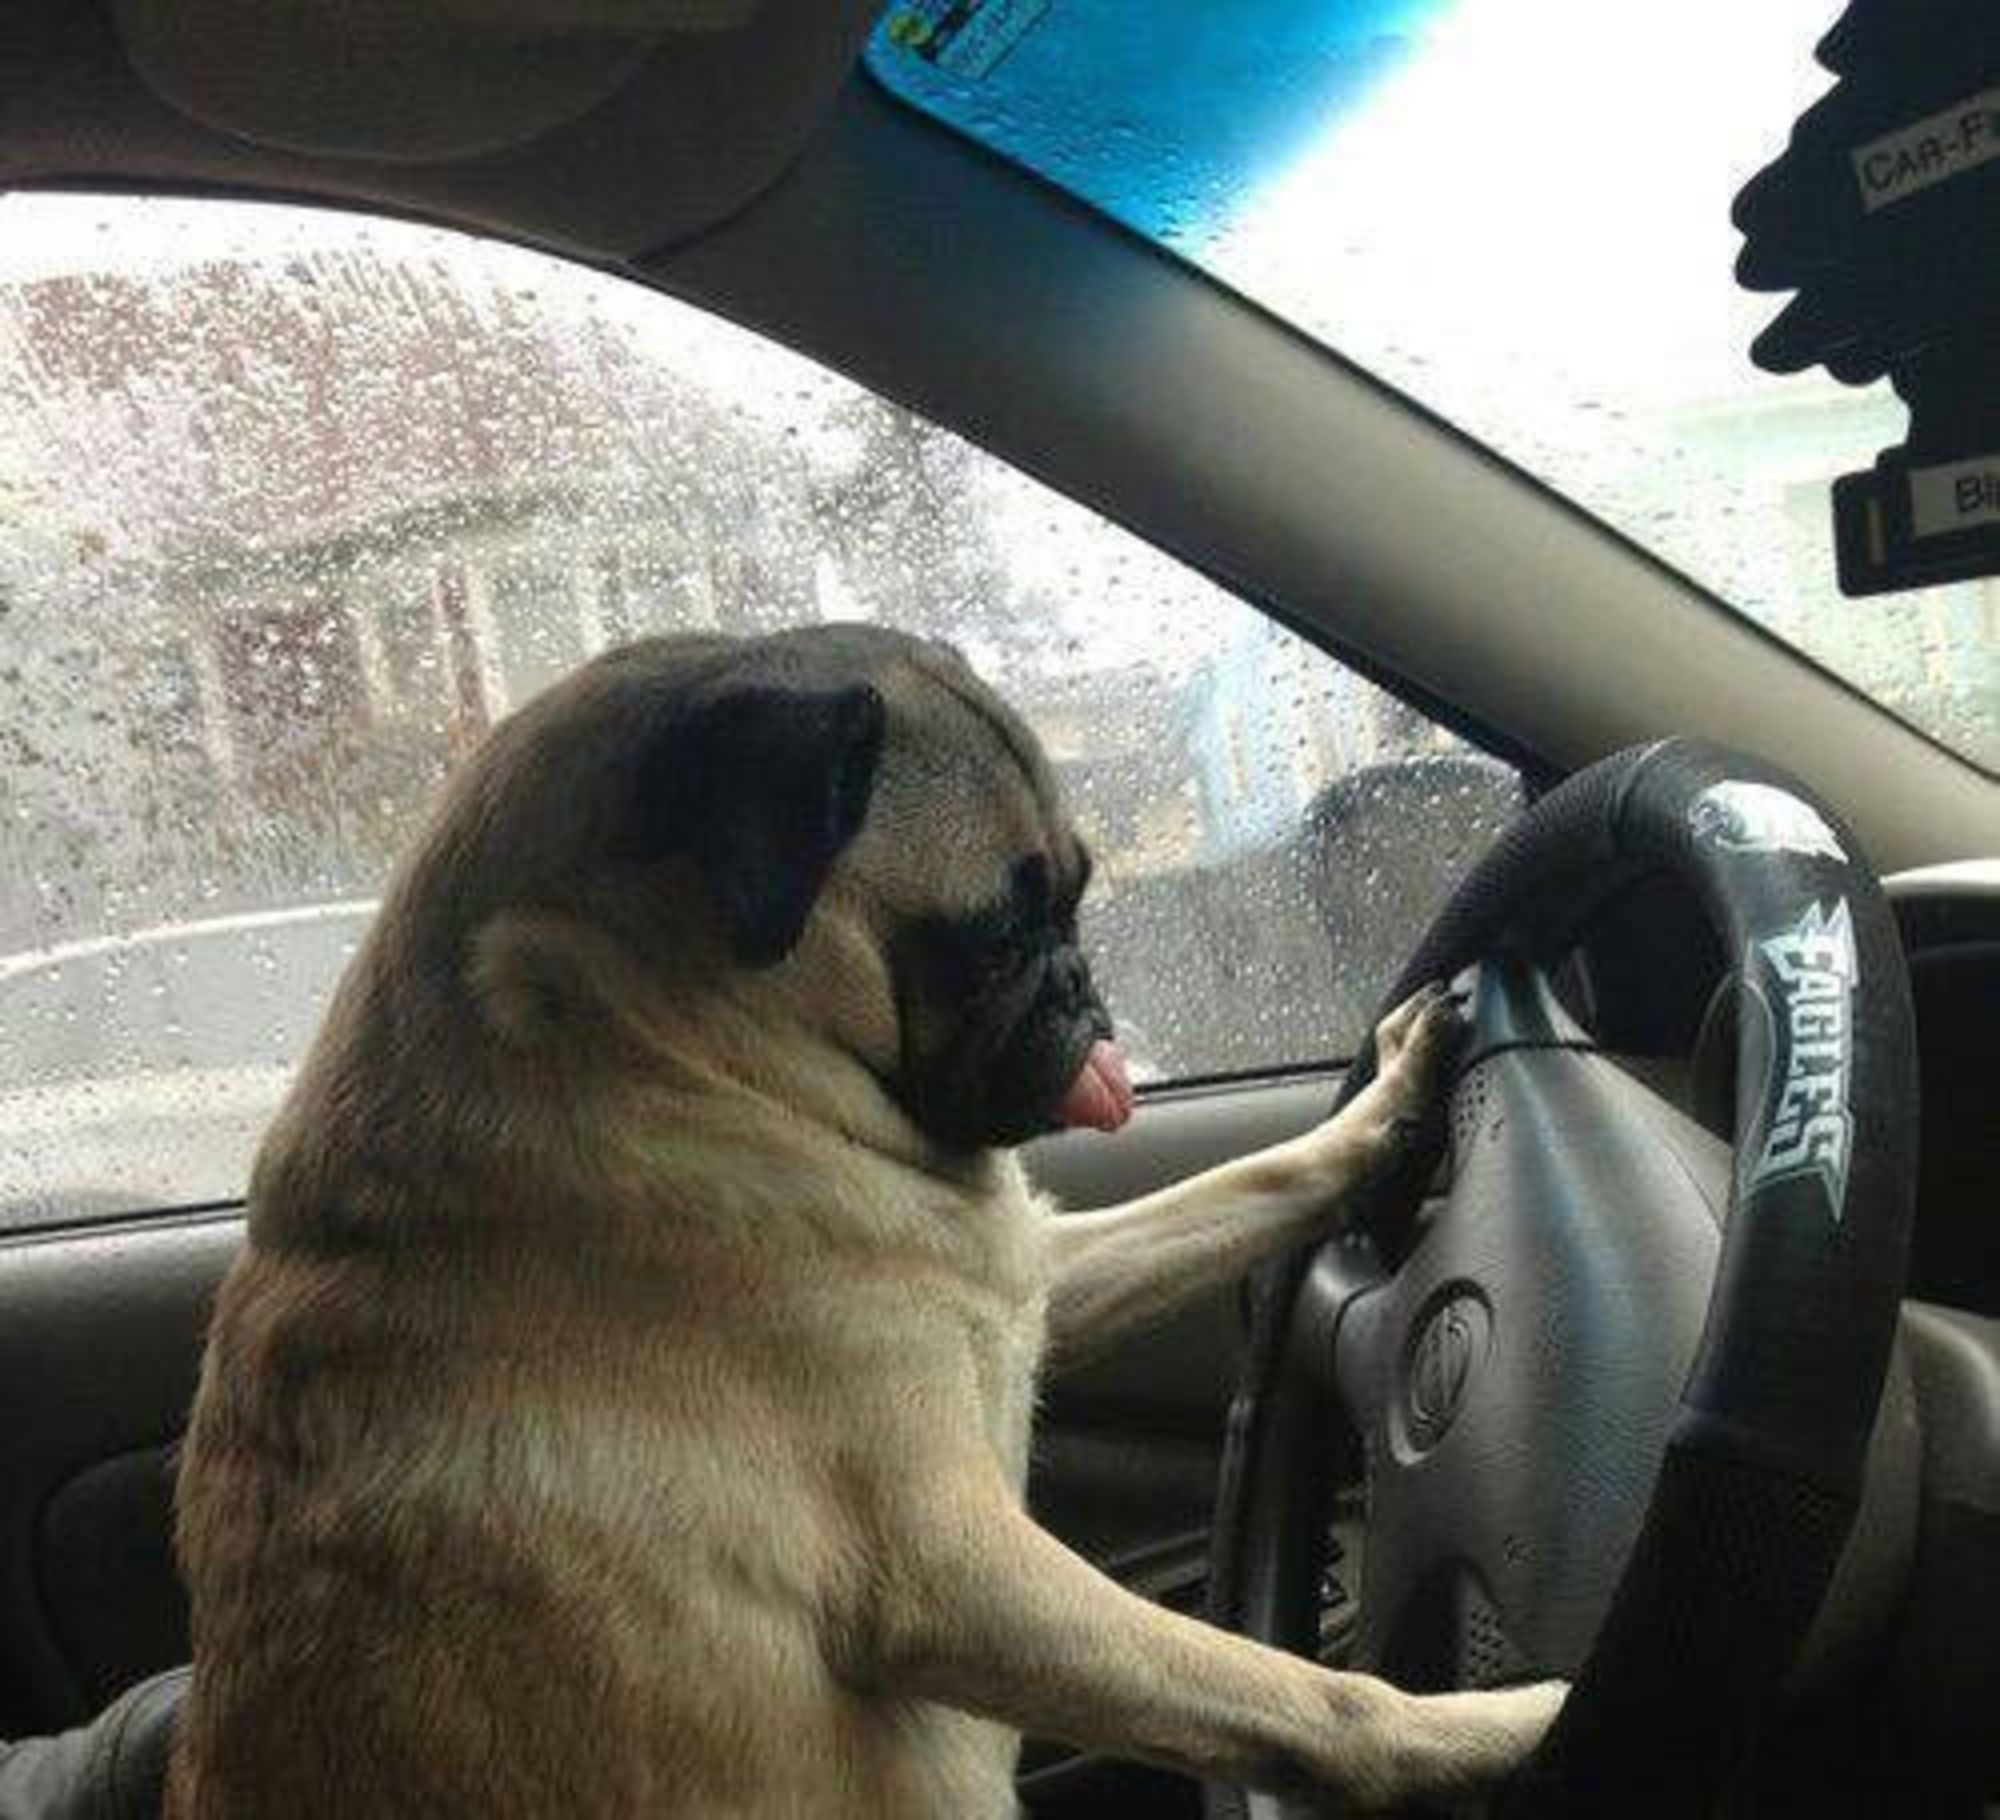 Pug sitting on the lap of a person in the driver's seat while its hands are on the steering wheel